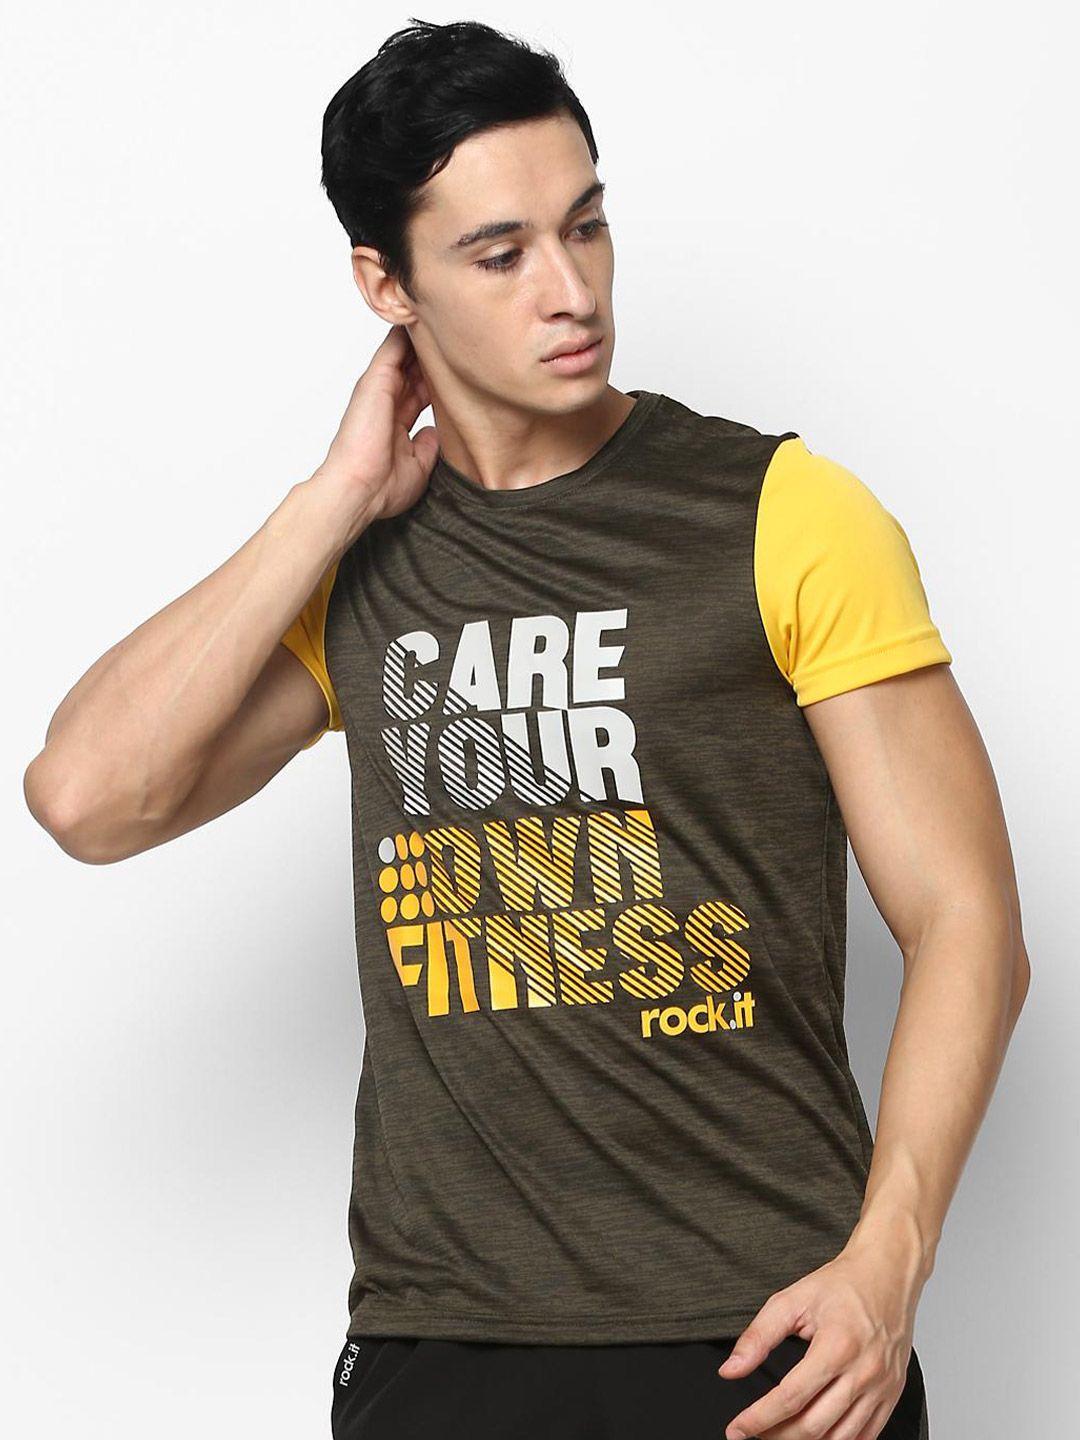 rock it men olive green typography printed slim fit training or gym t-shirt